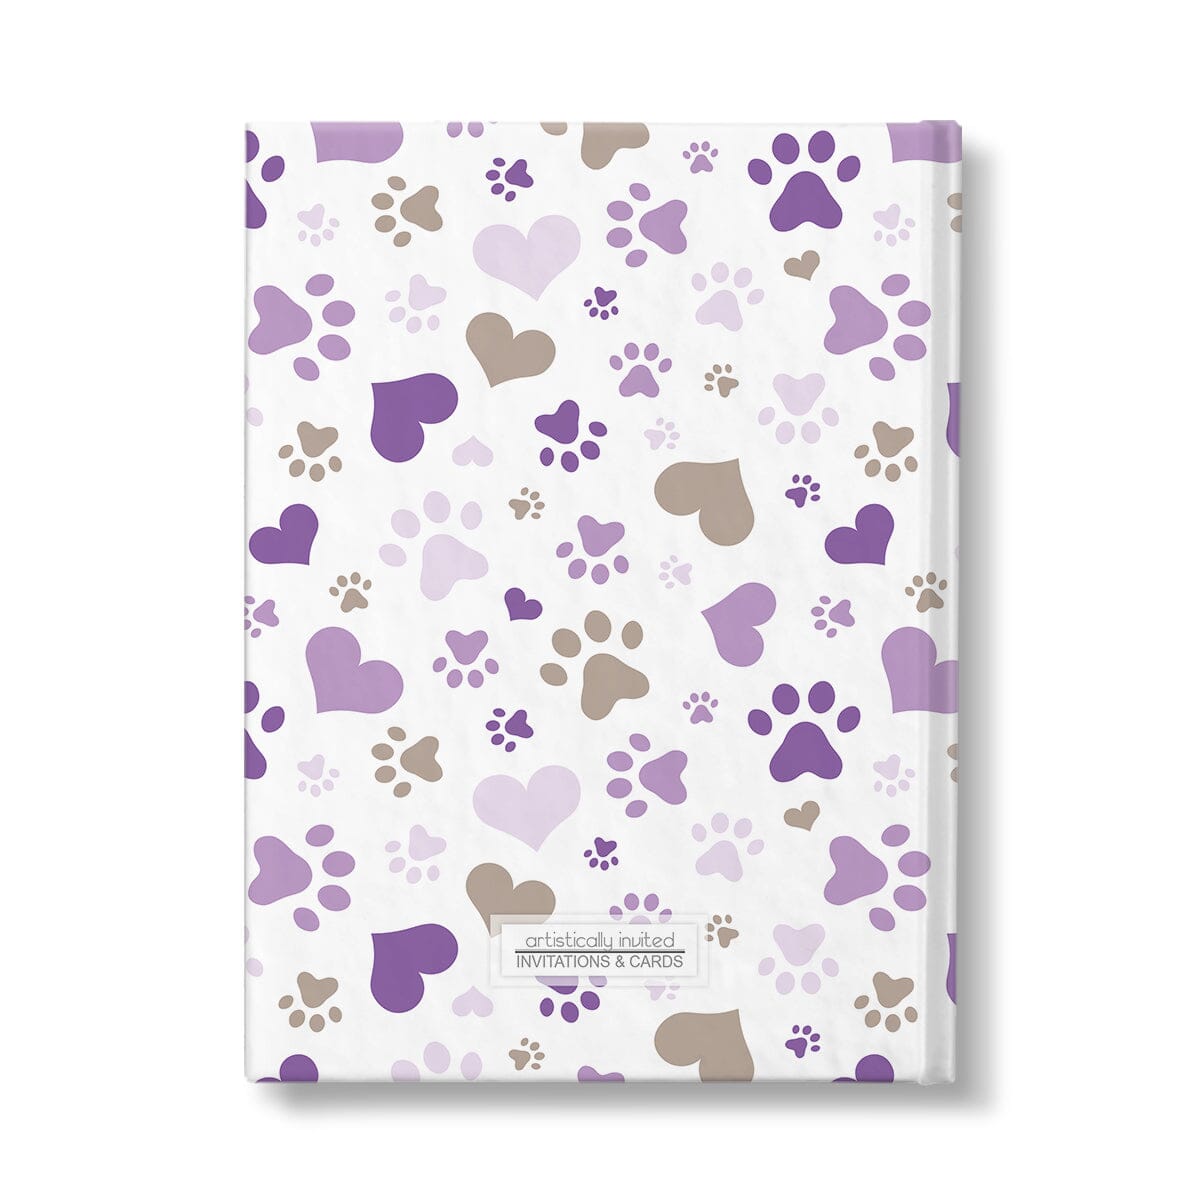 Personalized Purple Hearts and Paw Prints Journal at Artistically Invited. Back side of the book.